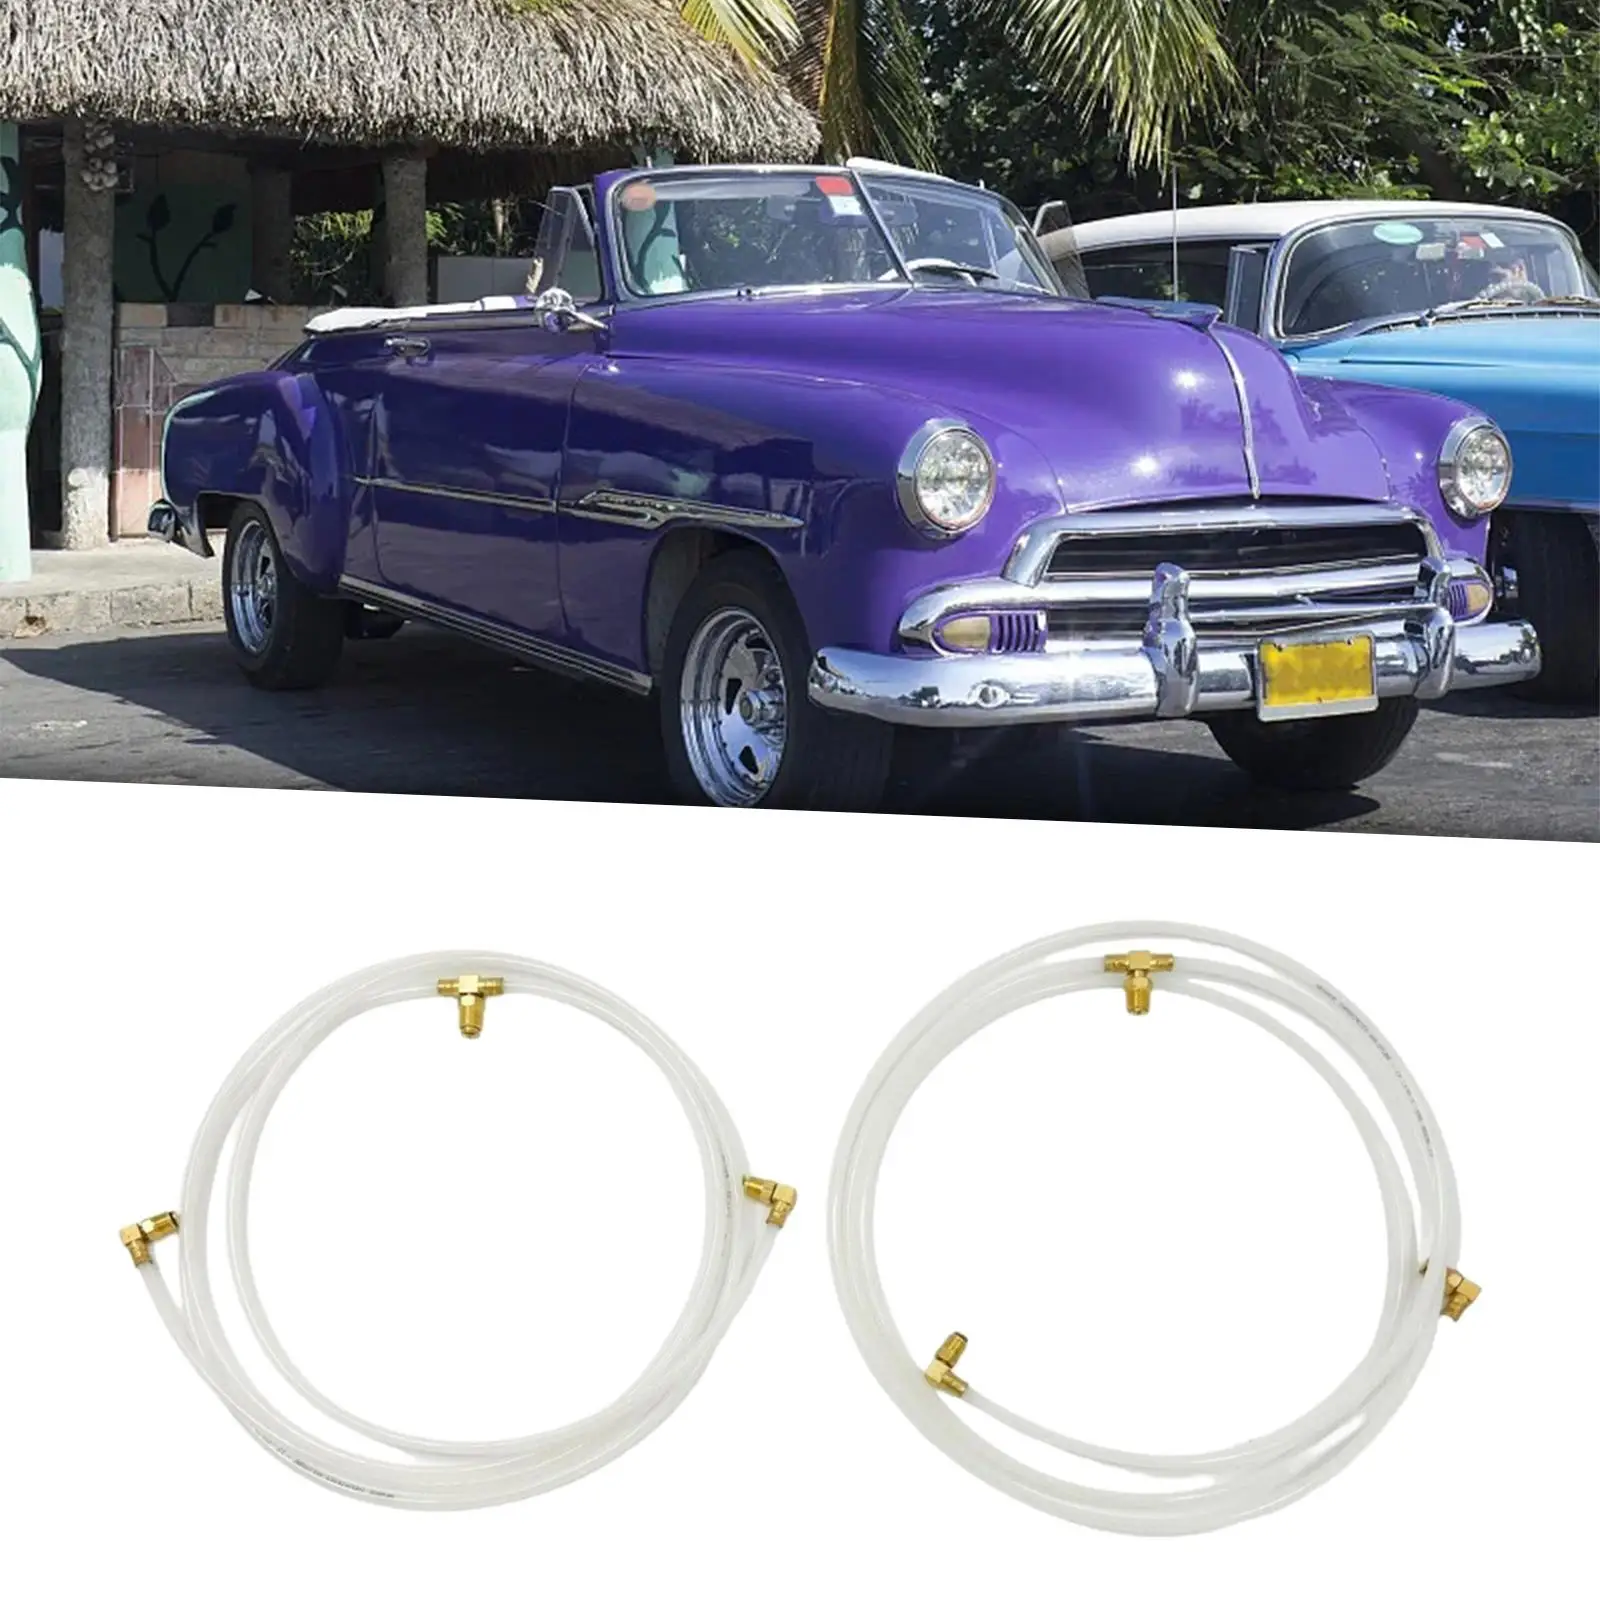 Convertible Top Hydraulic Fluid Hose Line Ho-white-set Pair Hoses for Chevrolet Corvair Impala Replacement Accessories